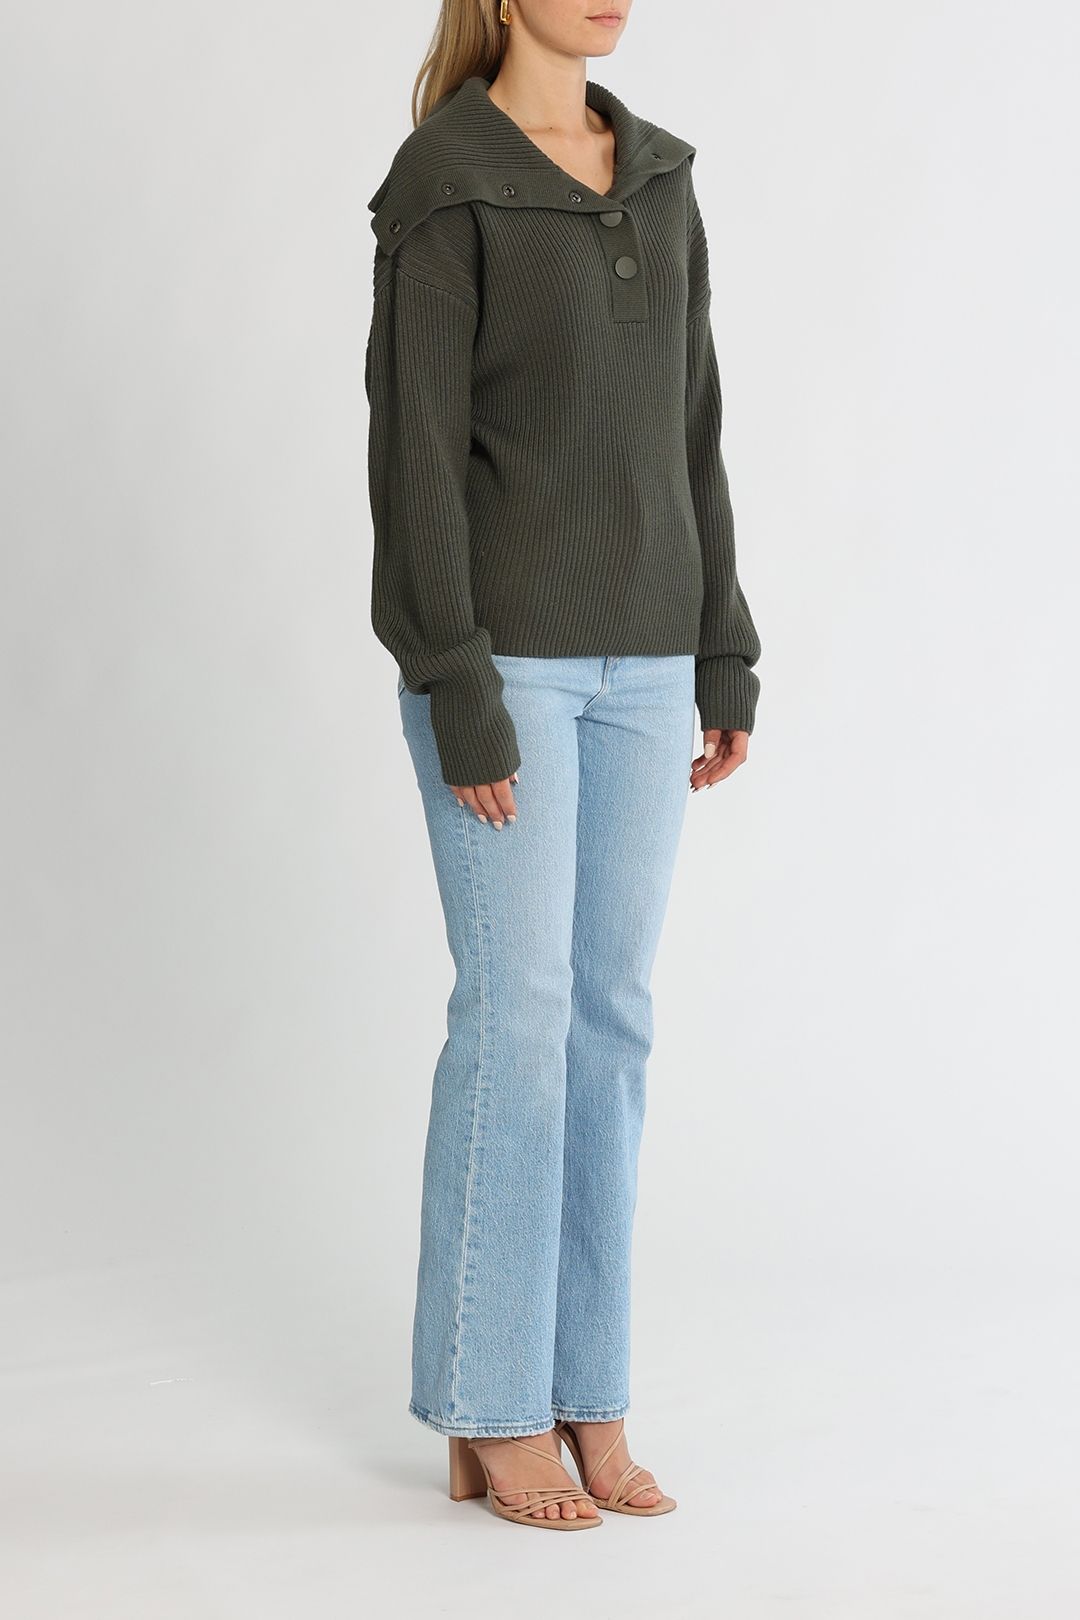 Camilla and Marc Dena Collared Knit Steel Long Sleeves